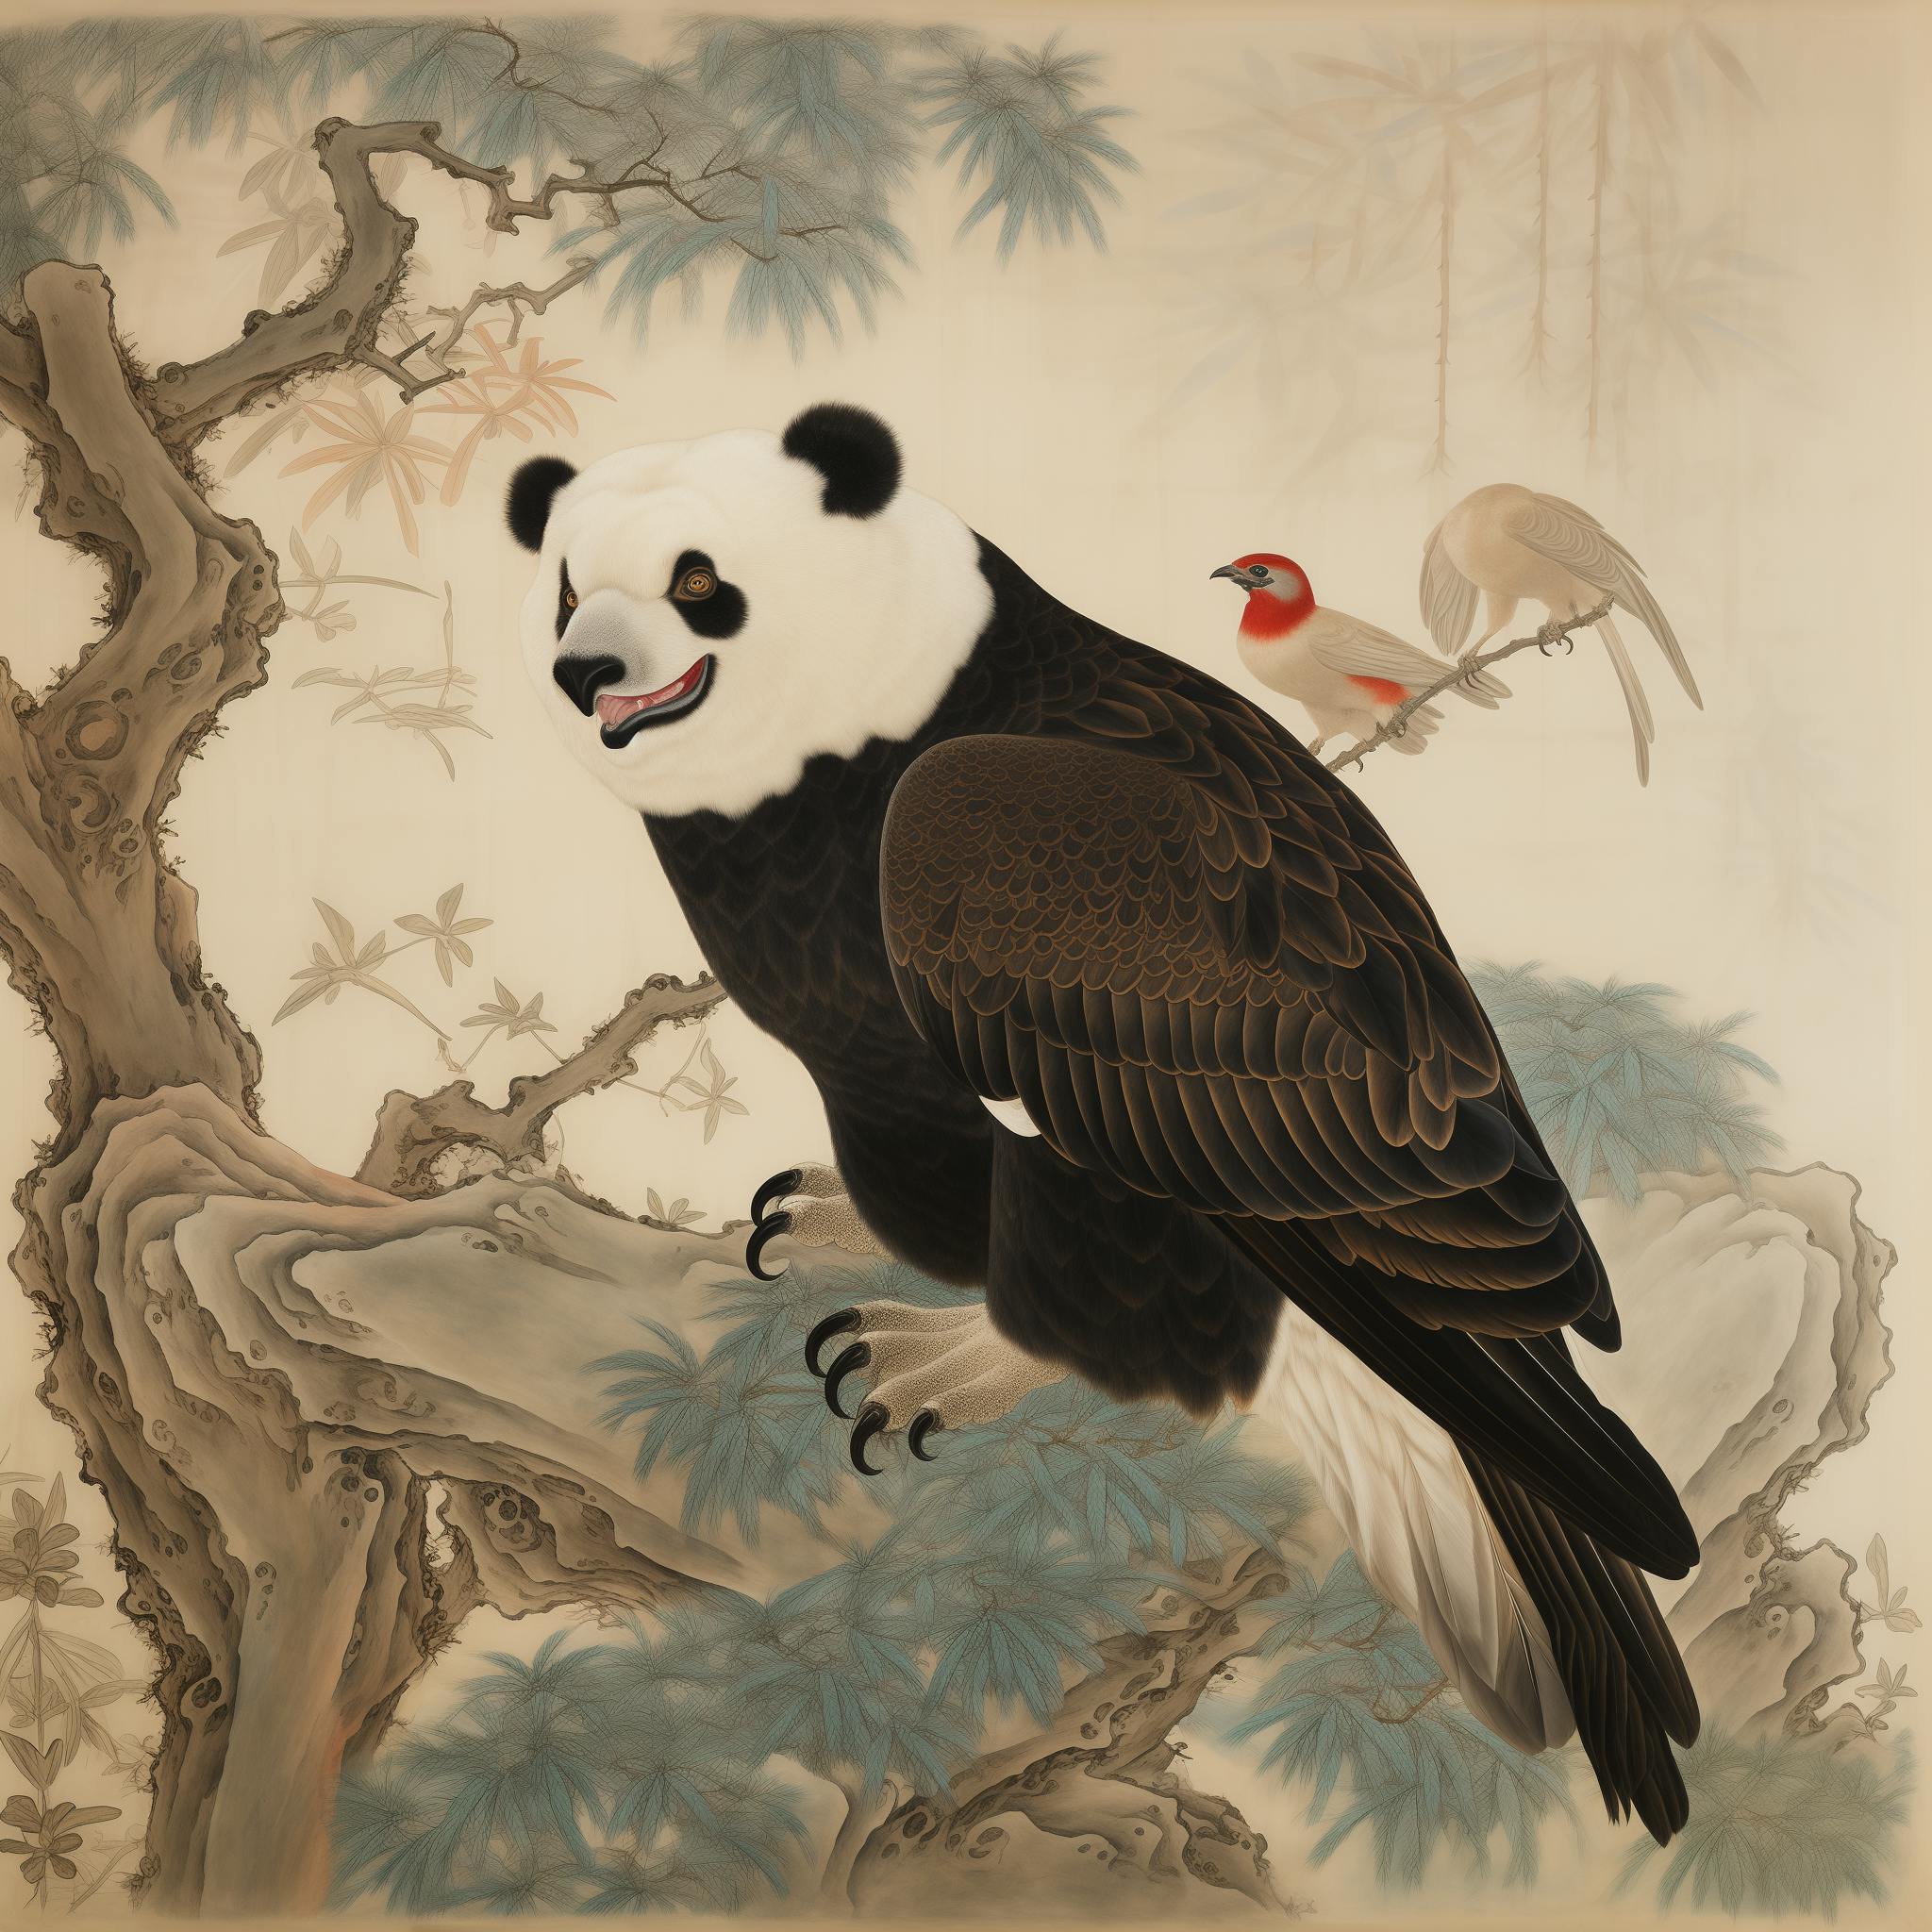 Setser on US-China Trade, Lessons from USTR, Economics of Great Powers, and Panda Diplomacy